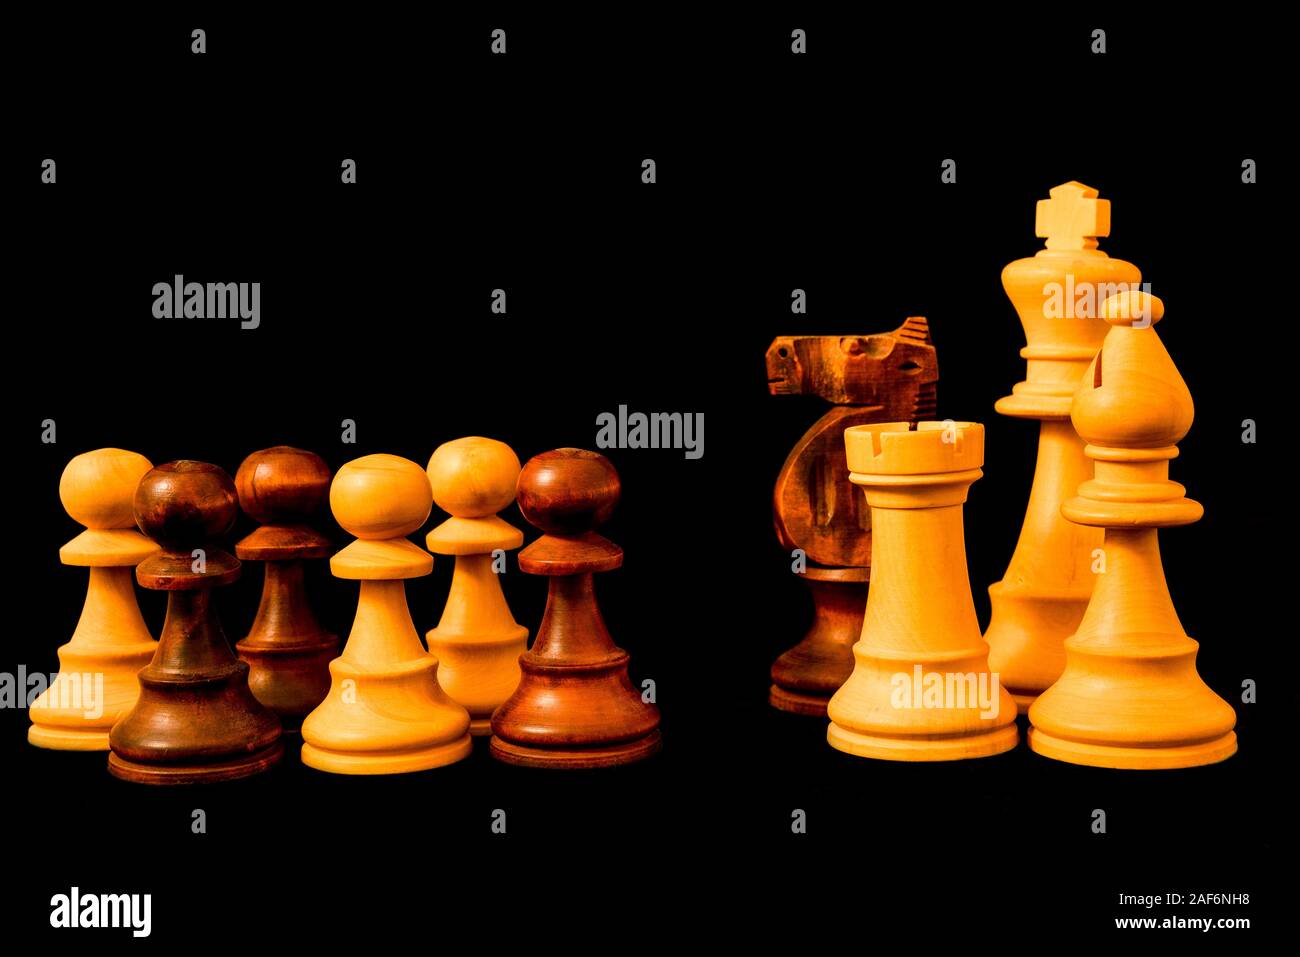 Political and economic against the common people. Rich versus poor concept. Standard chess wooden piece on black background Stock Photo